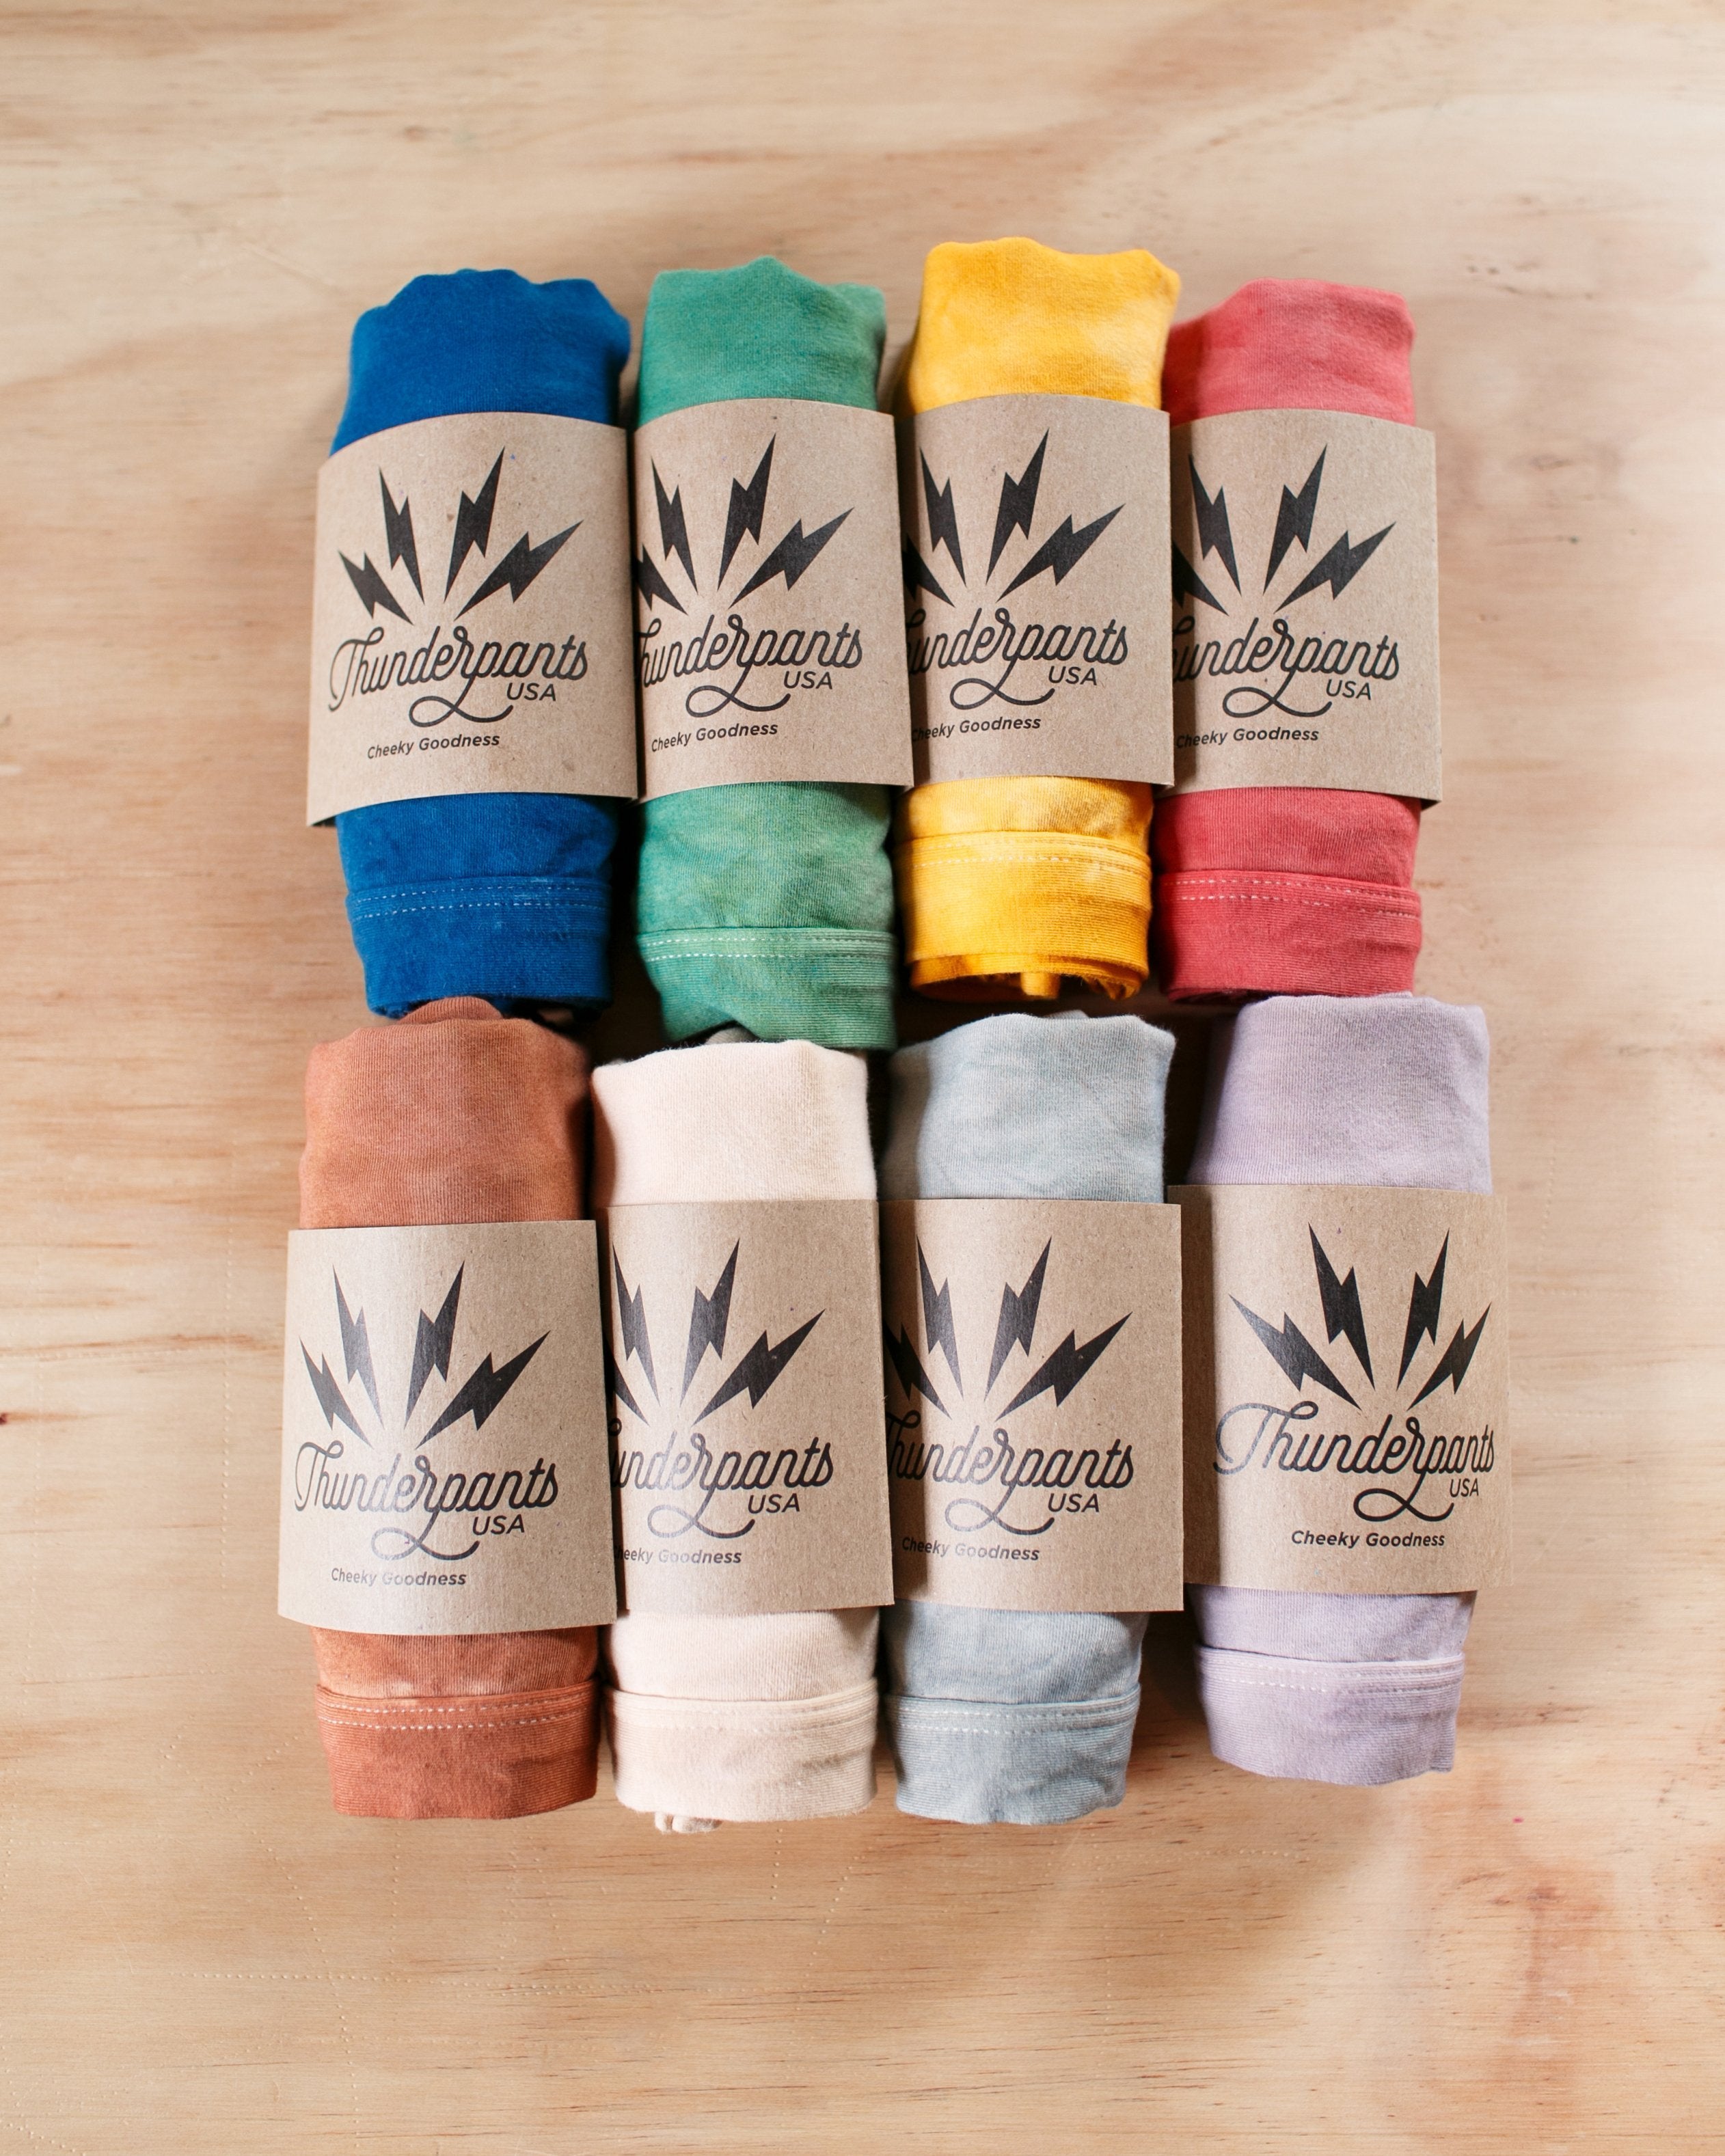 Eight colors of organic cotton limited edition hand dyed underwear in their Thunderpants packaging.